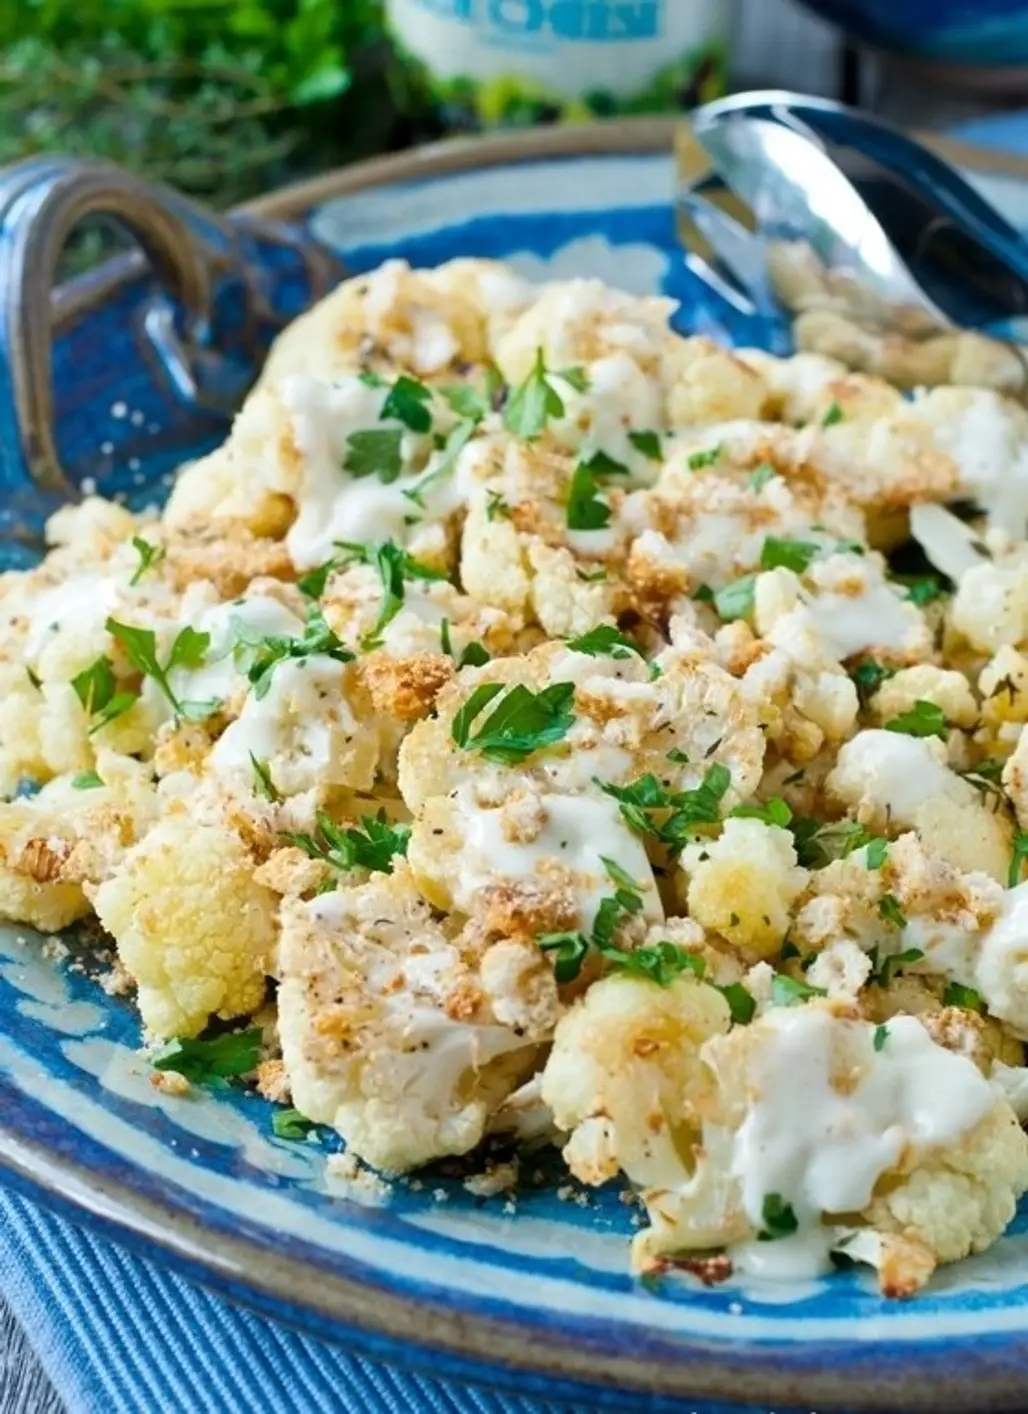 Oven Roasted Cauliflower with Crunchy Topping